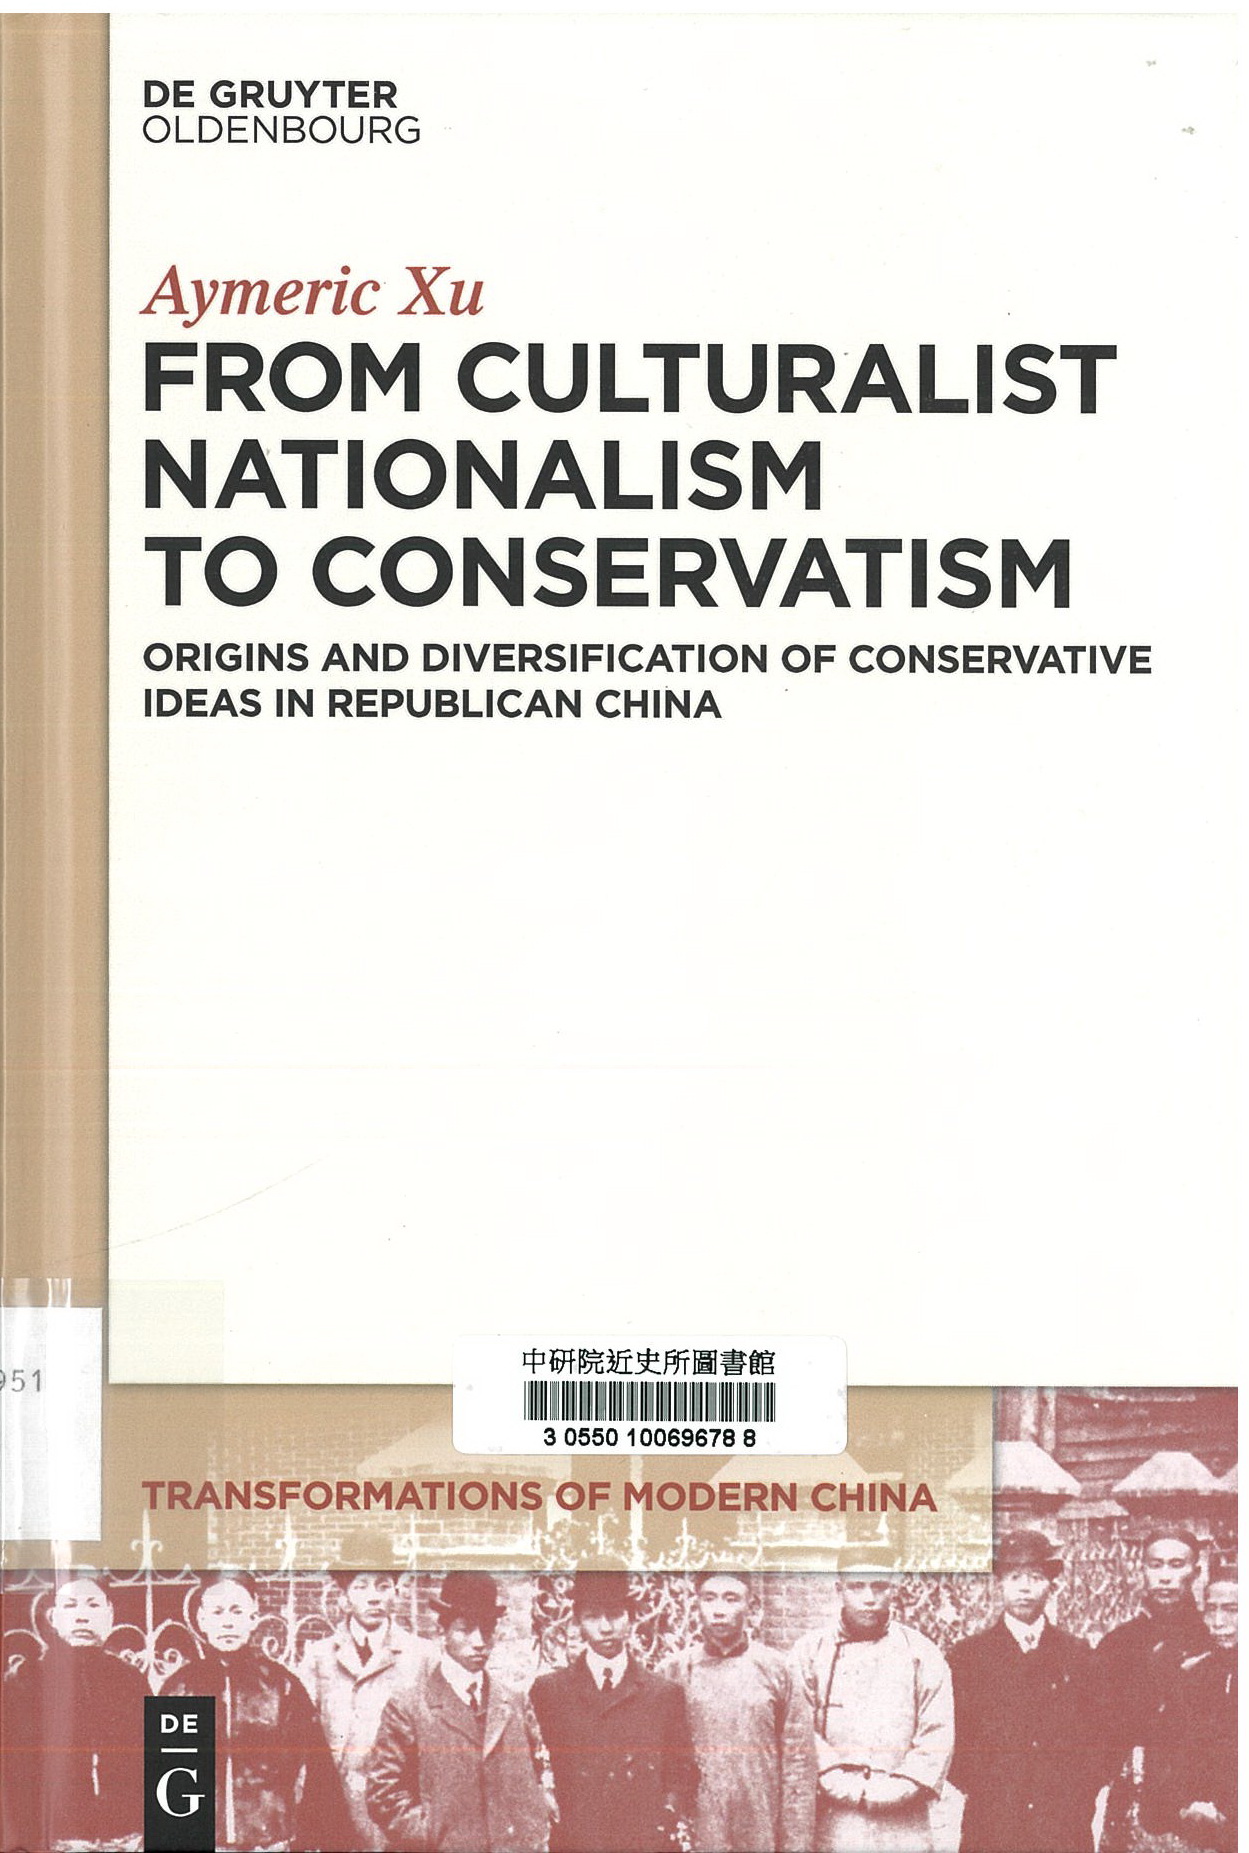 From culturalist nationalism to conservatism : origins and diversification of conservative ideas in republican China